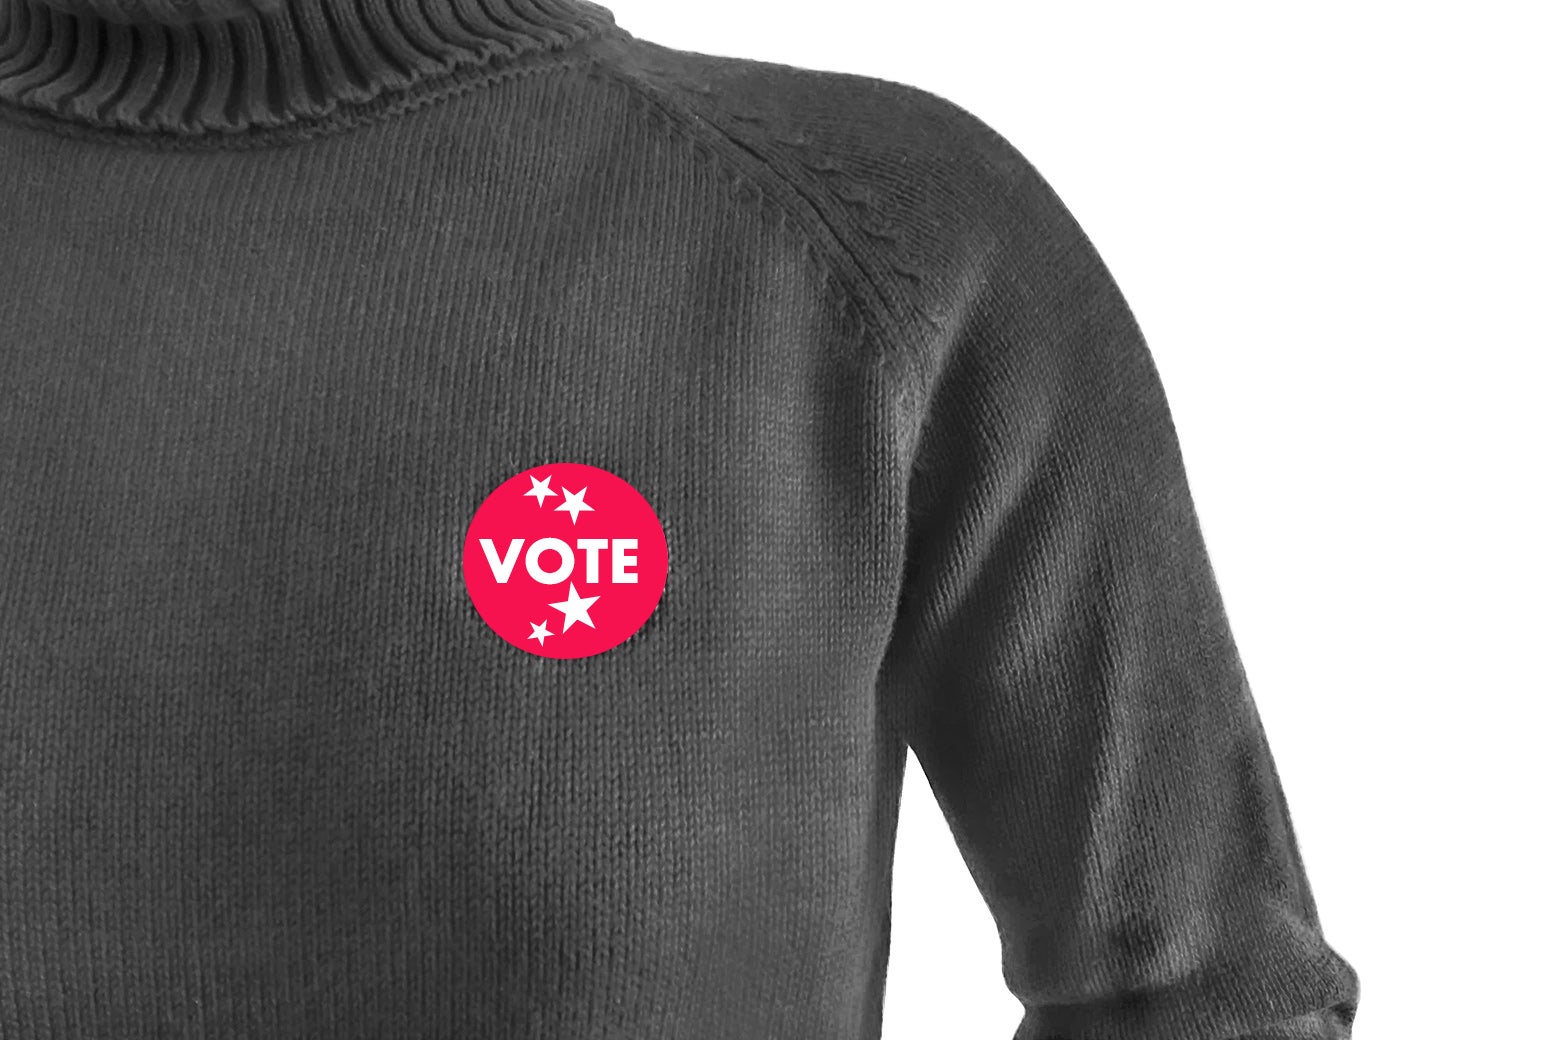 A sweater with a pink vote sticker on it.